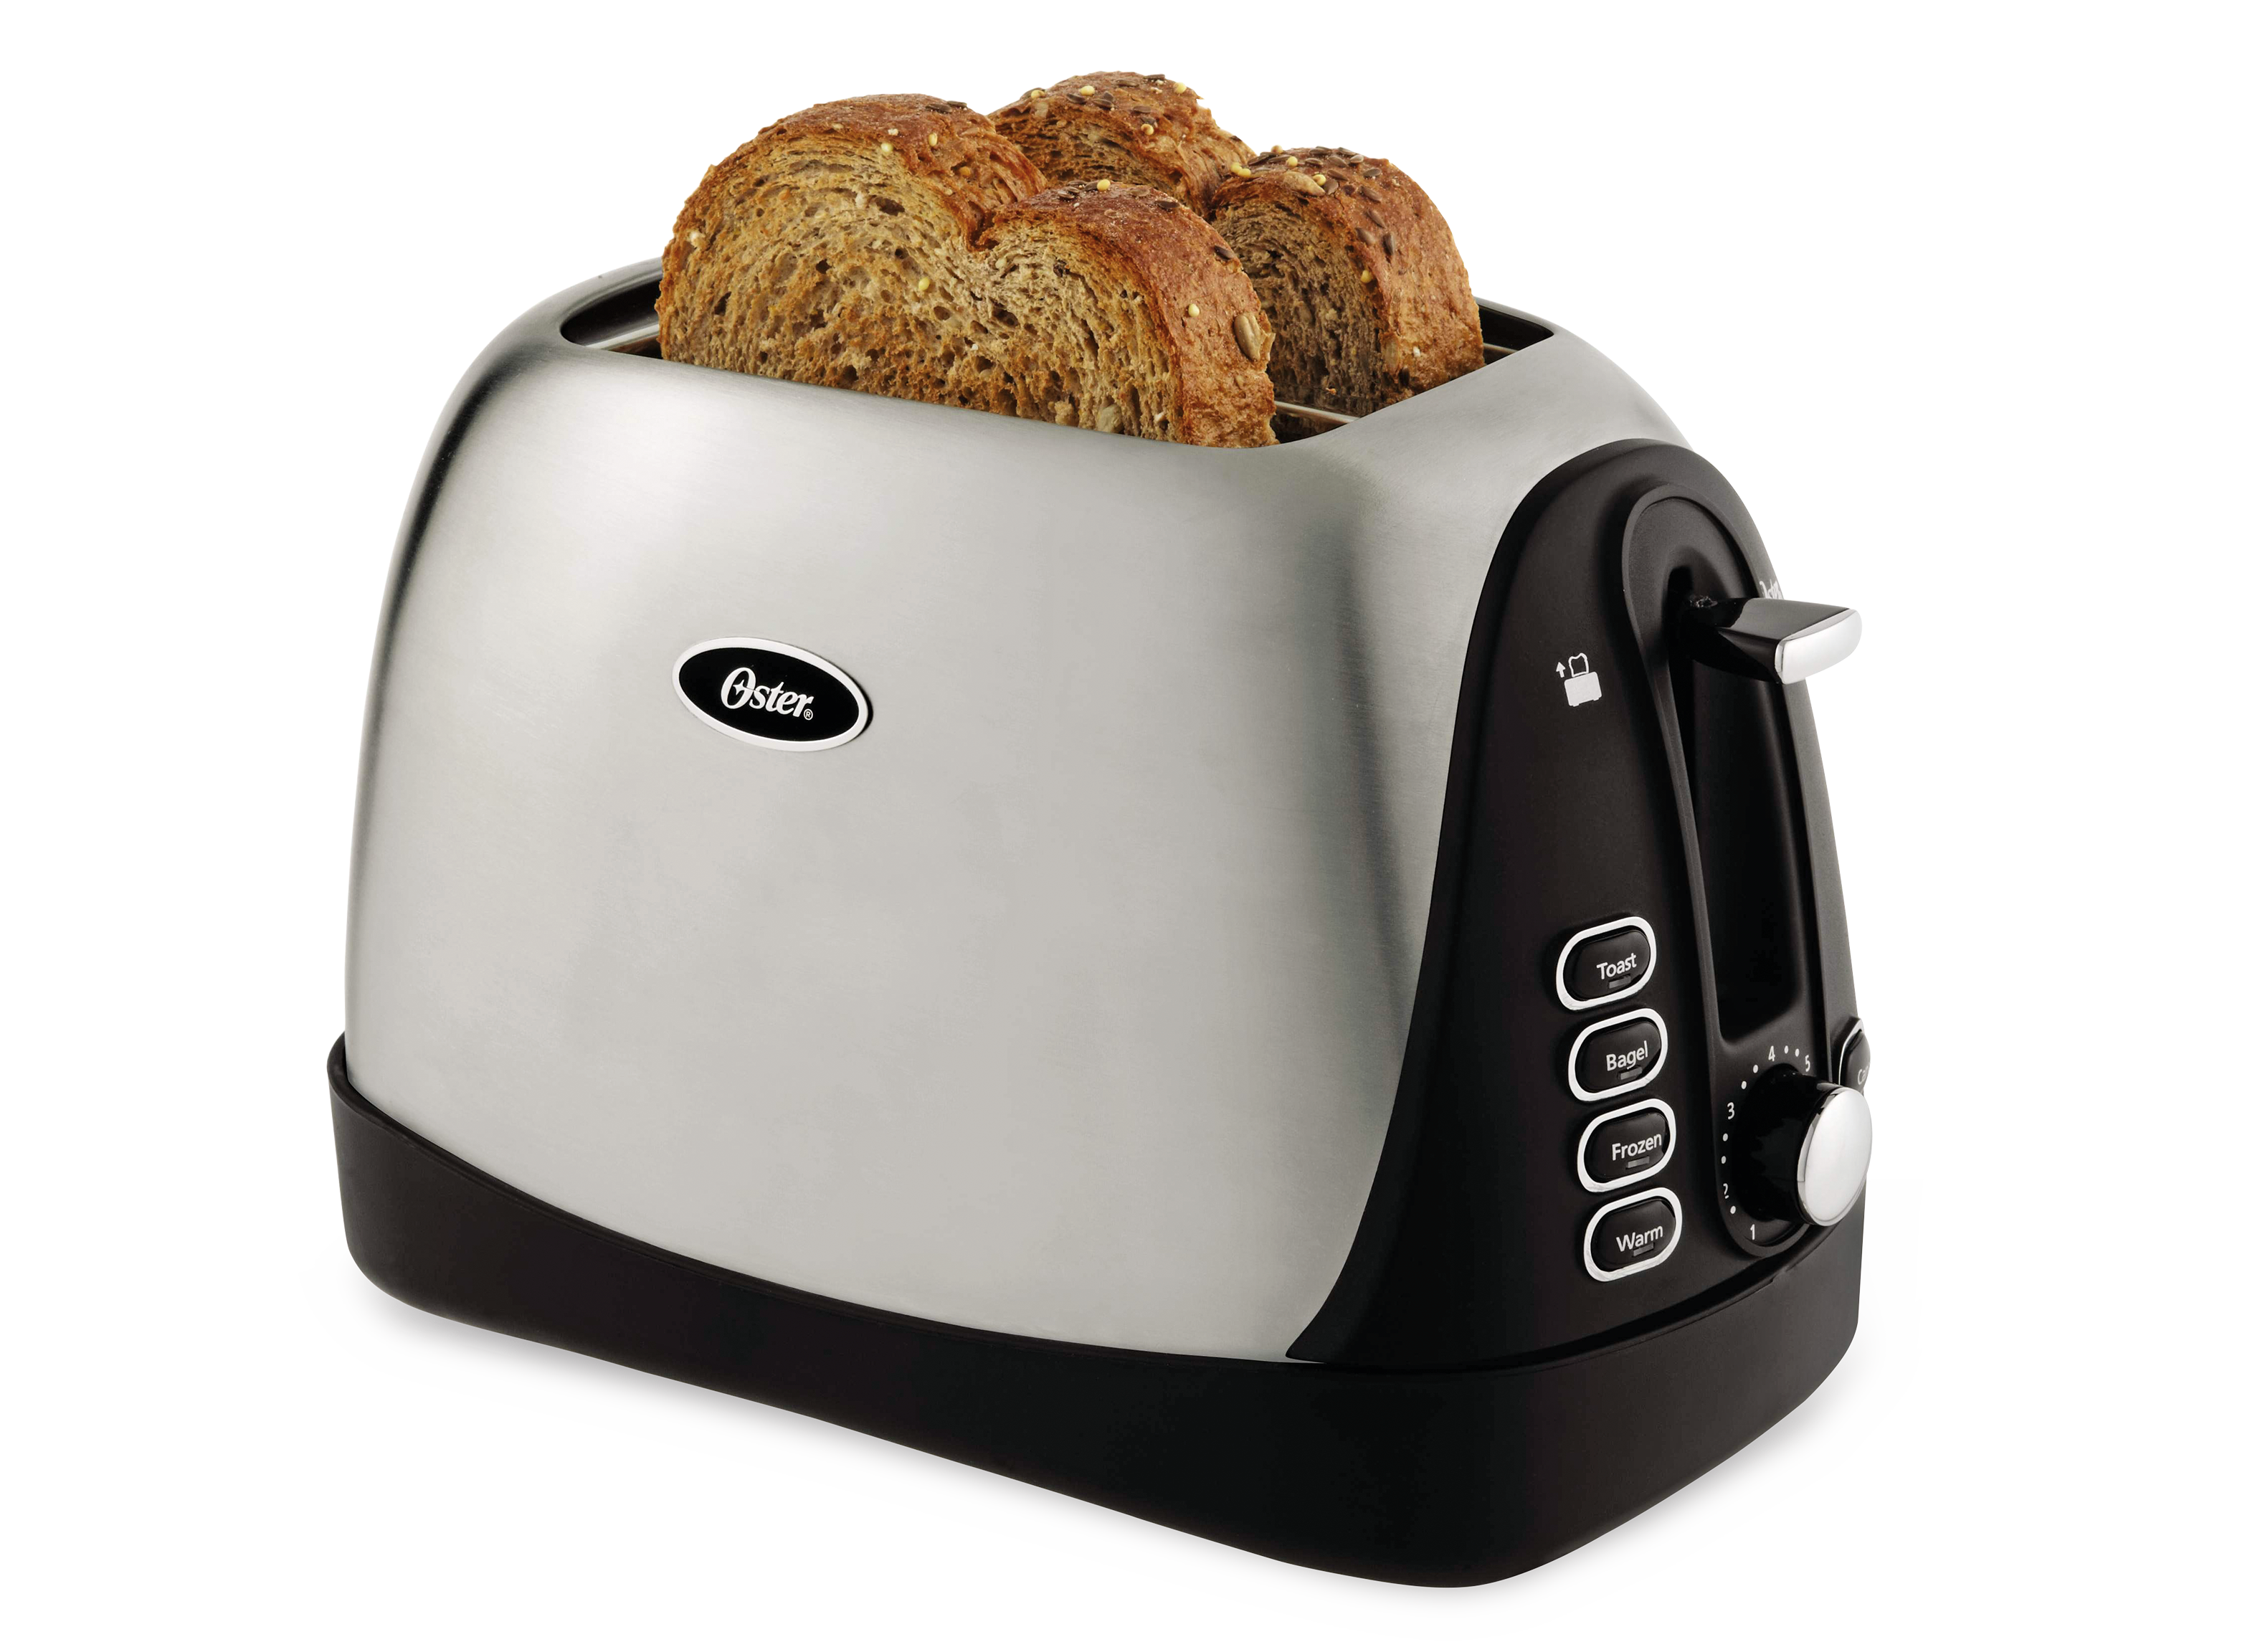 Oster 2-Slice Toaster with Quick-Check Lever Review 